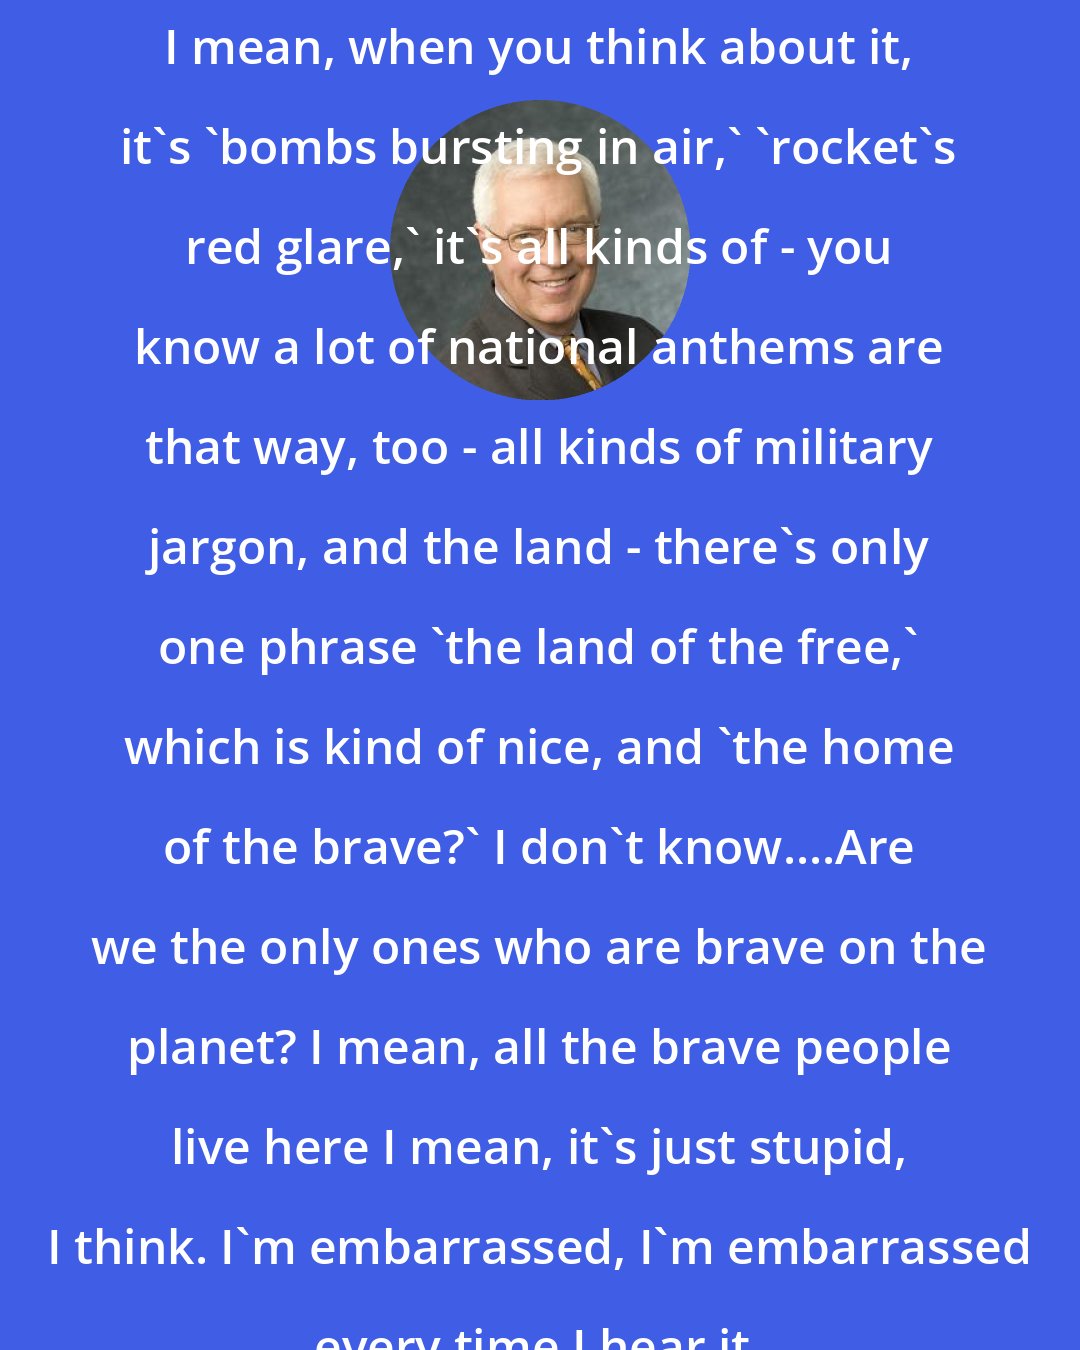 Bill Press: I mean, when you think about it, it's 'bombs bursting in air,' 'rocket's red glare,' it's all kinds of - you know a lot of national anthems are that way, too - all kinds of military jargon, and the land - there's only one phrase 'the land of the free,' which is kind of nice, and 'the home of the brave?' I don't know....Are we the only ones who are brave on the planet? I mean, all the brave people live here I mean, it's just stupid, I think. I'm embarrassed, I'm embarrassed every time I hear it.